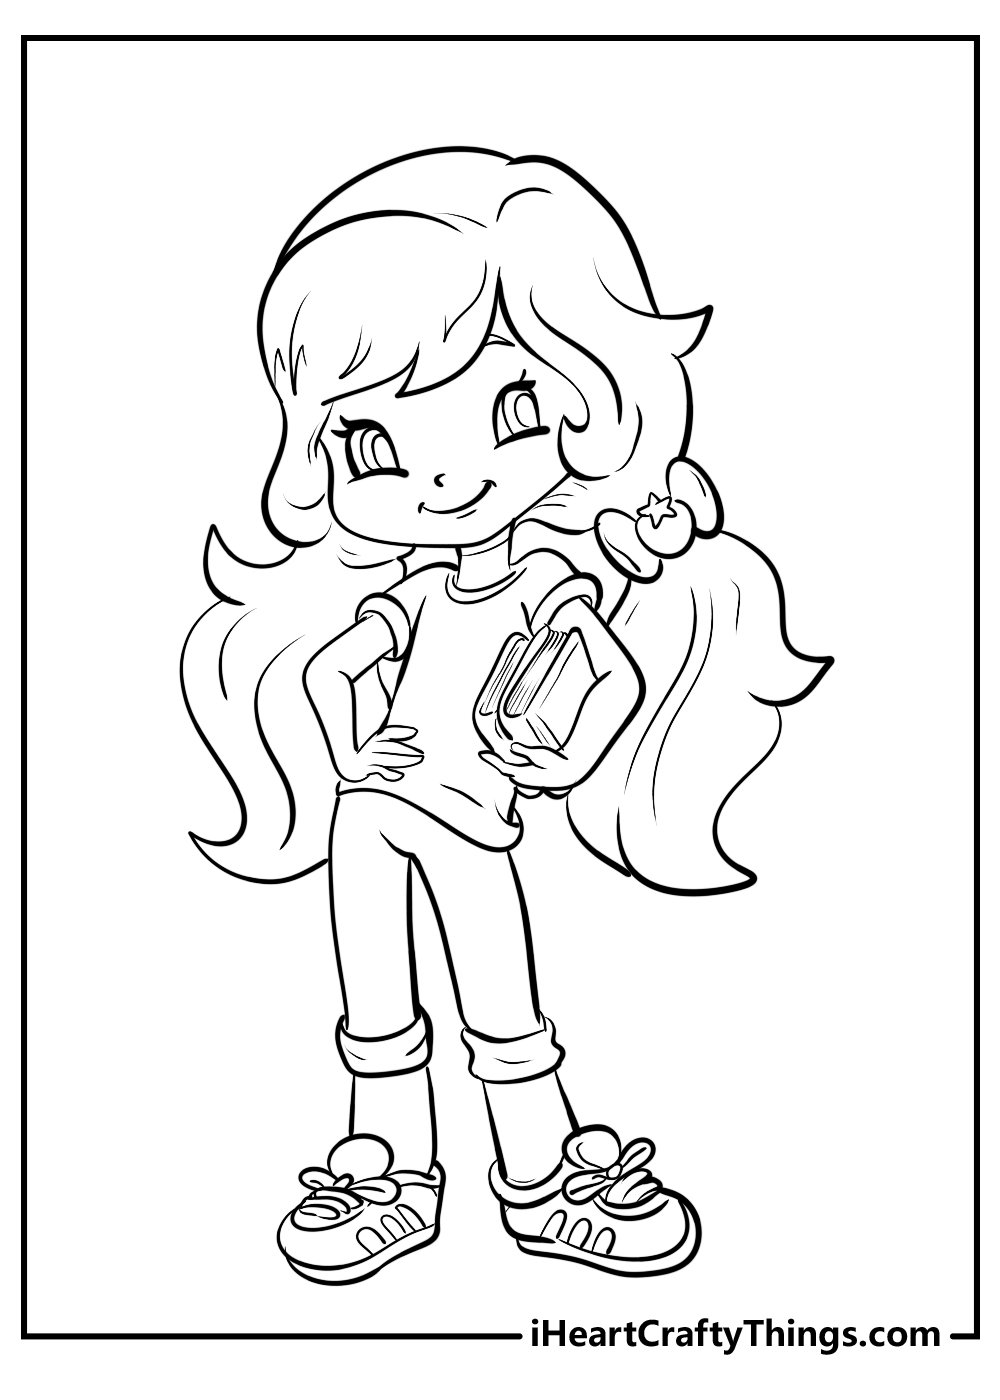 New Strawberry Shortcake Coloring Pages